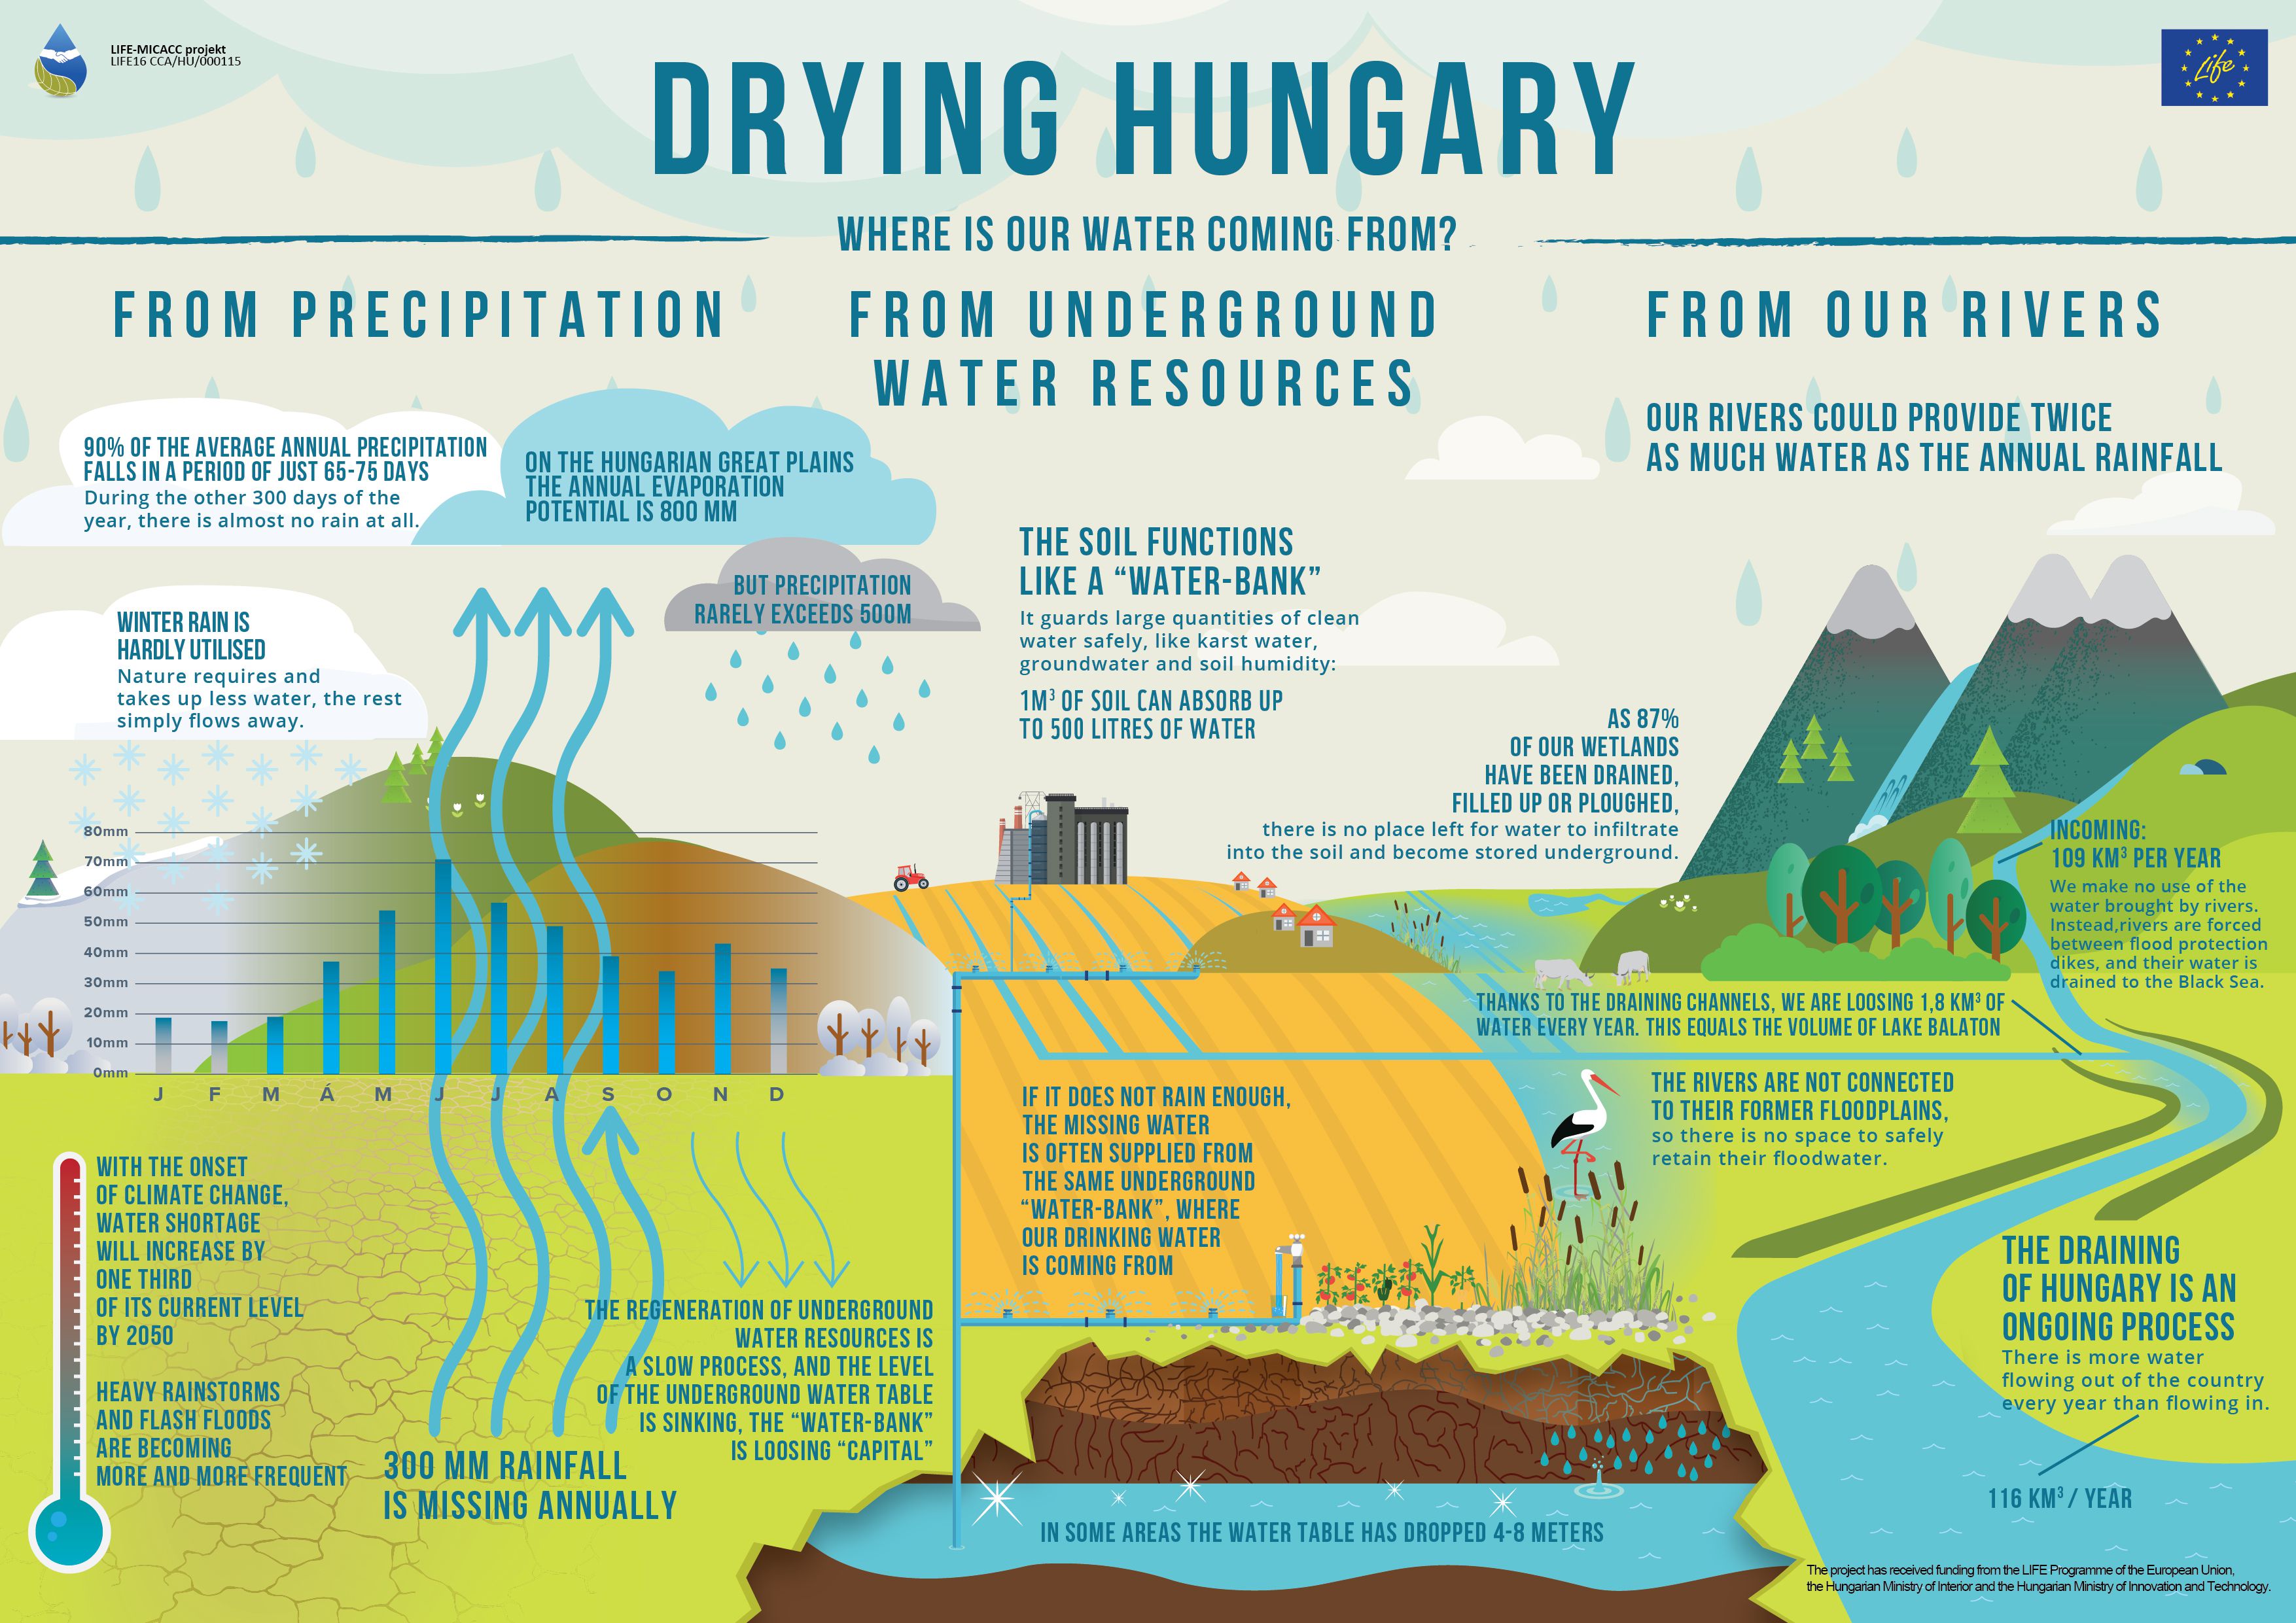 Drying Hungary infographic created by WWF Hungary